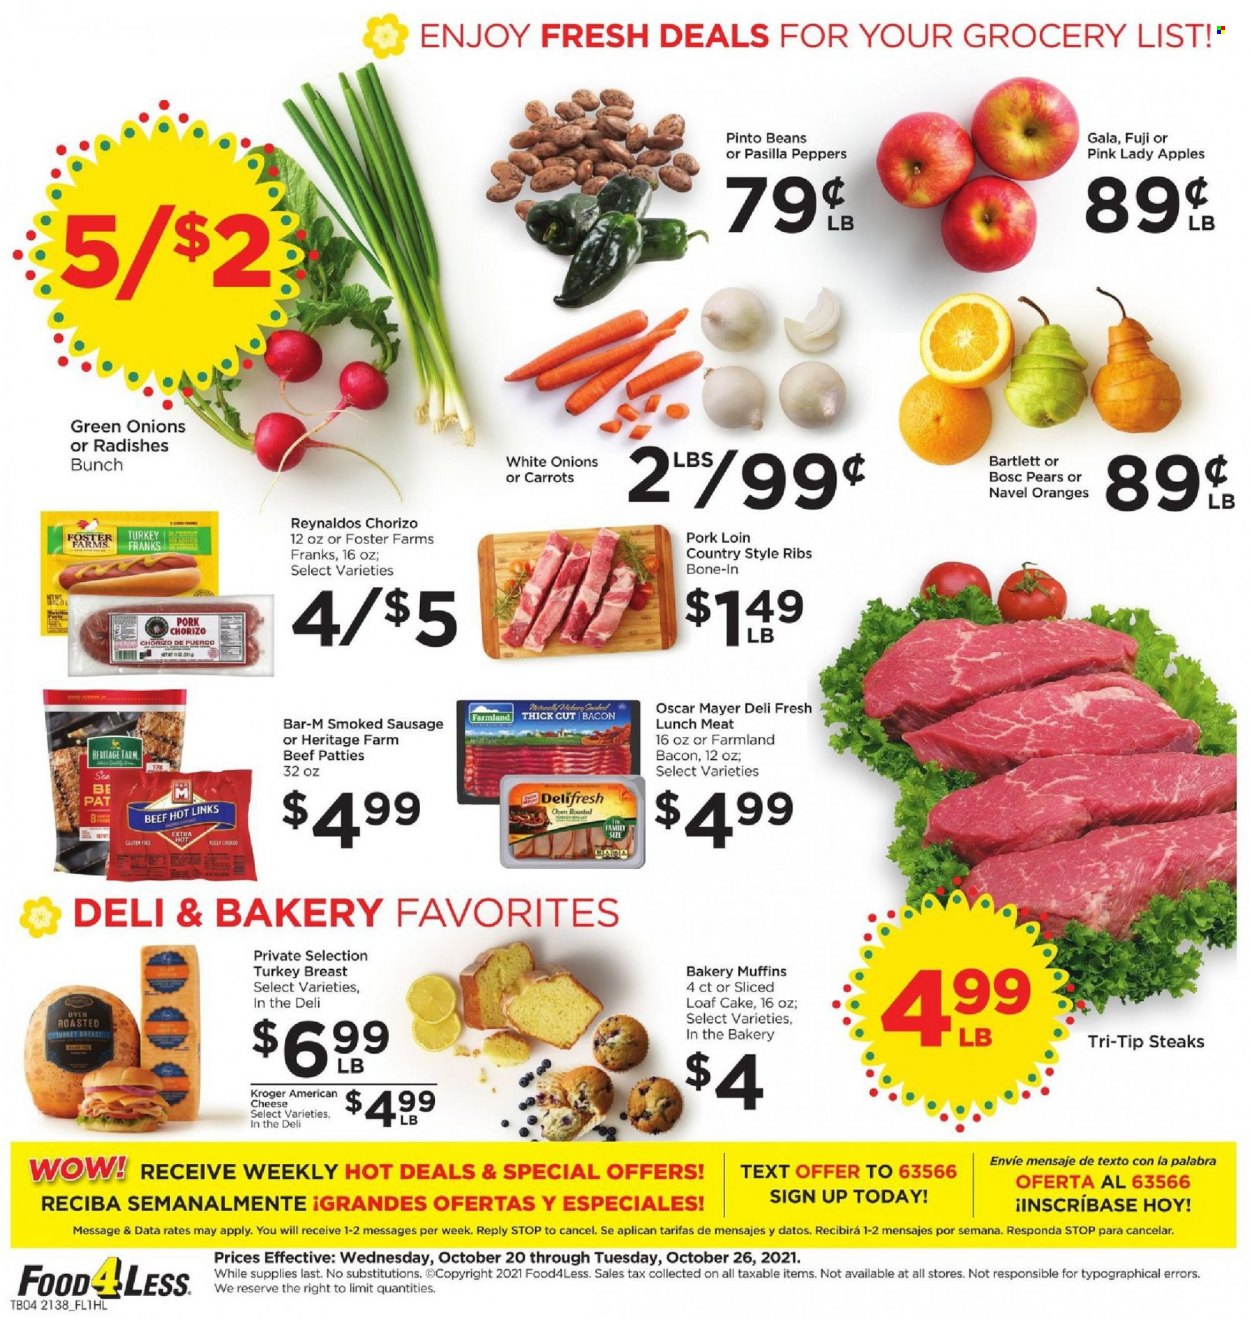 thumbnail - Food 4 Less Flyer - 10/20/2021 - 10/26/2021 - Sales products - cake, muffin, loaf cake, beans, carrots, radishes, peppers, green onion, apples, Gala, pears, oranges, Pink Lady, bacon, chorizo, Oscar Mayer, sausage, smoked sausage, lunch meat, american cheese, cheese, pinto beans, steak, pork loin, pork meat, pork ribs, country style ribs, pasilla, navel oranges. Page 4.